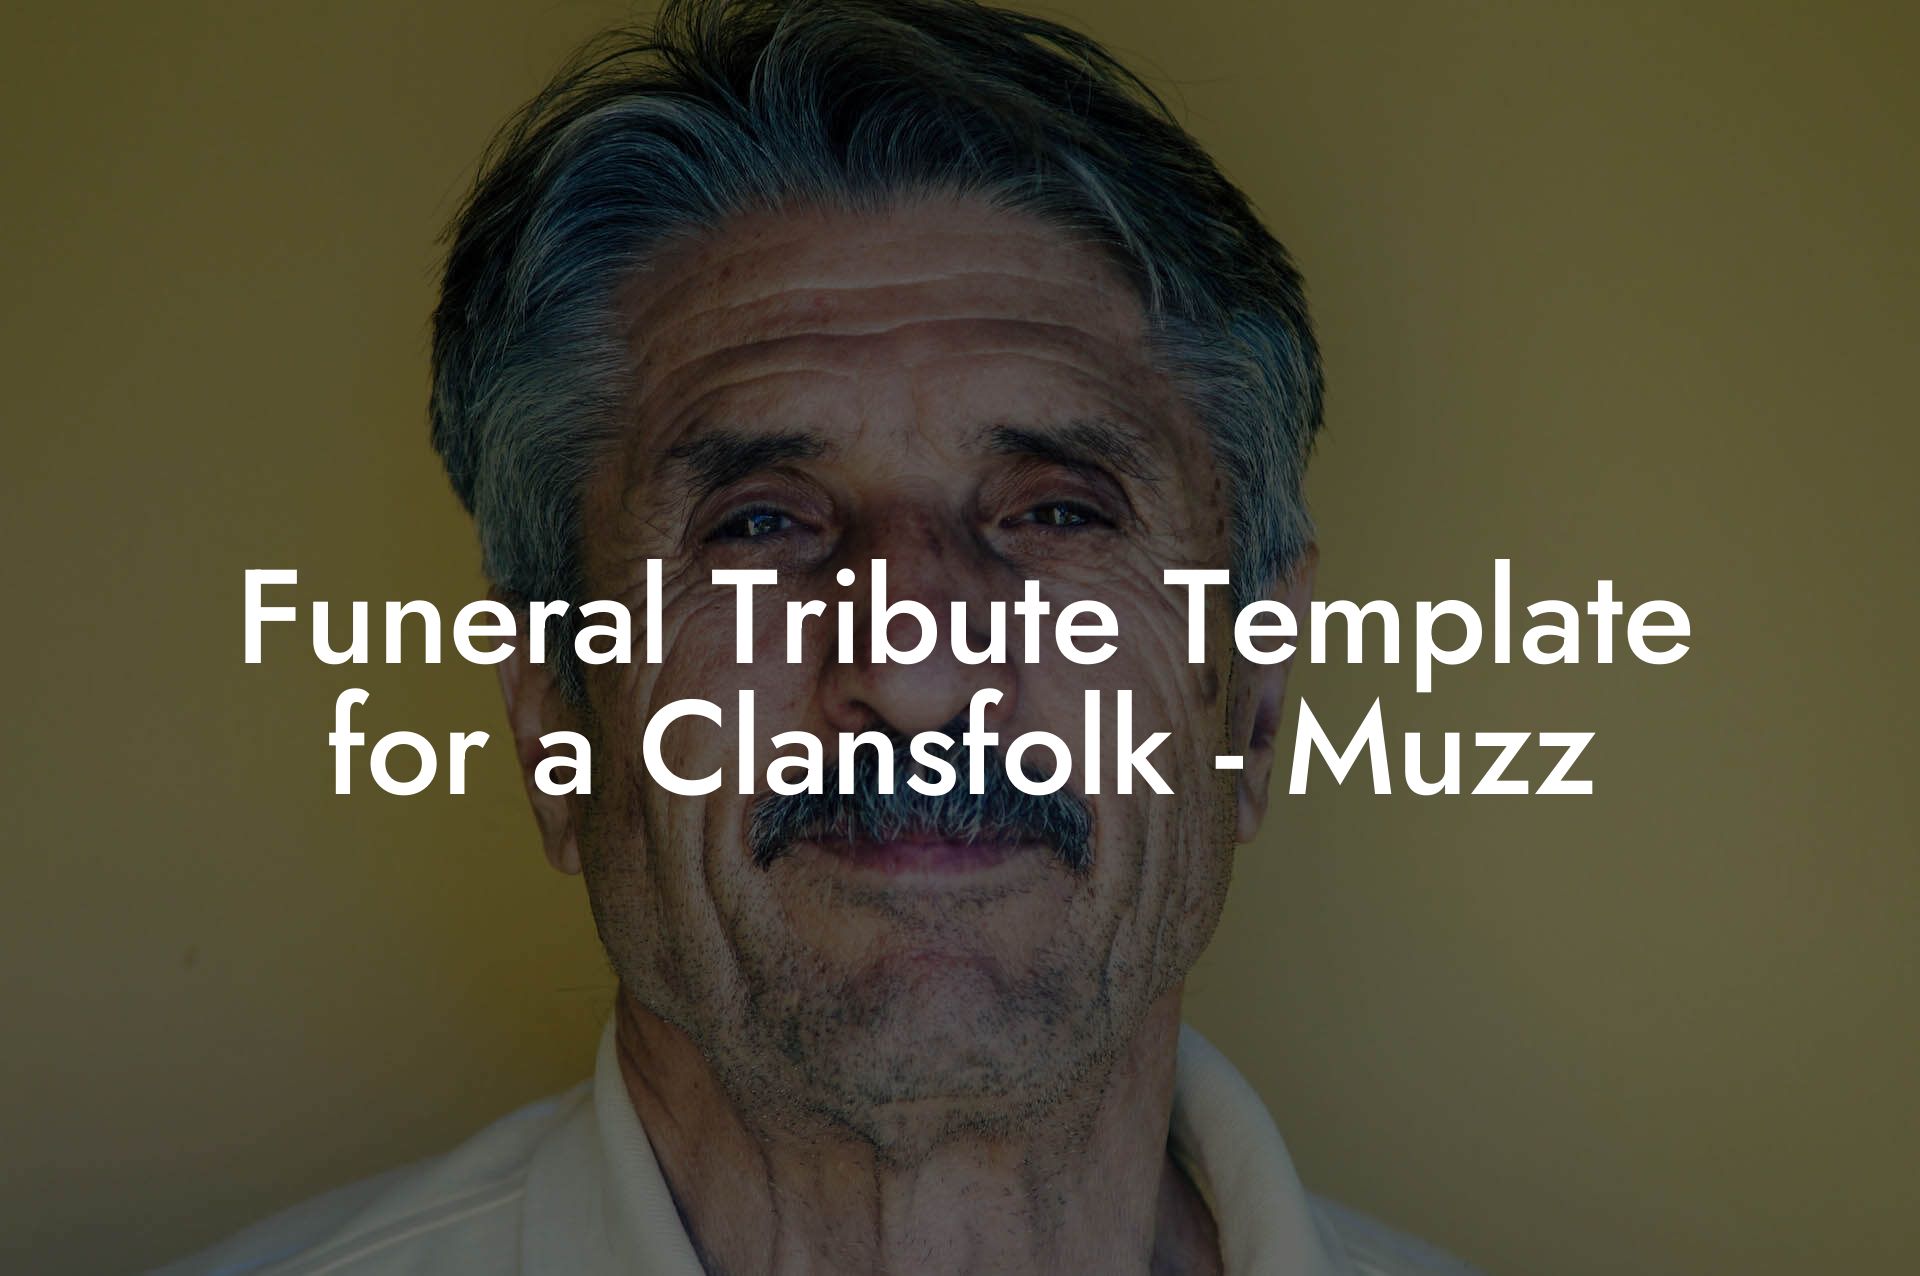 Funeral Tribute Template for a Clansfolk - Muzz